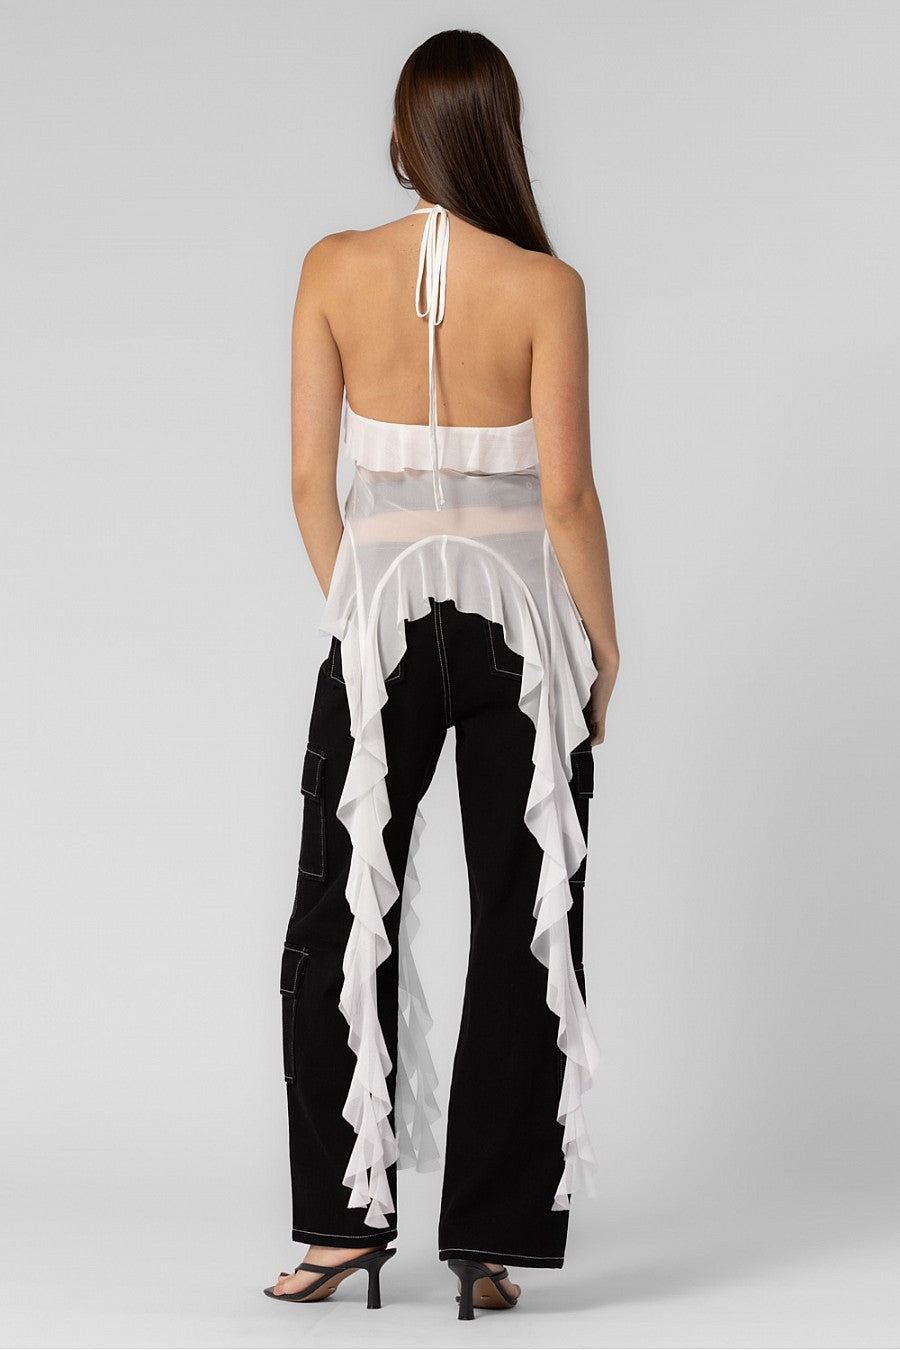 White sheer mesh halter neck top with a rosette, top ties in the front and features long ruffles.